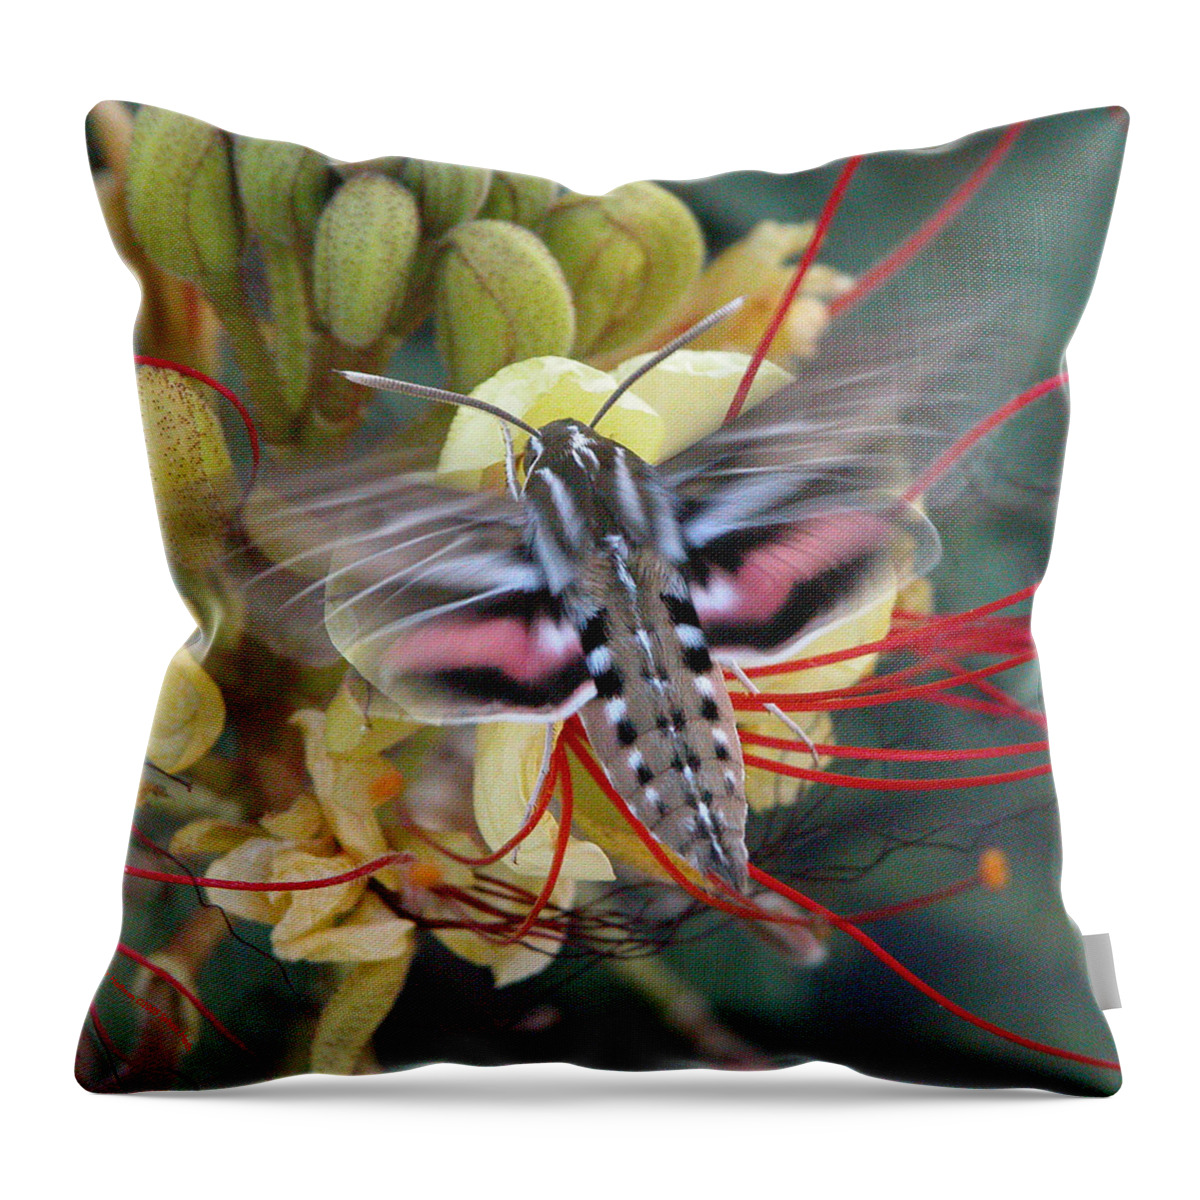 Sphinx Moth Throw Pillow featuring the photograph Sphinx Moth by Perry Hoffman